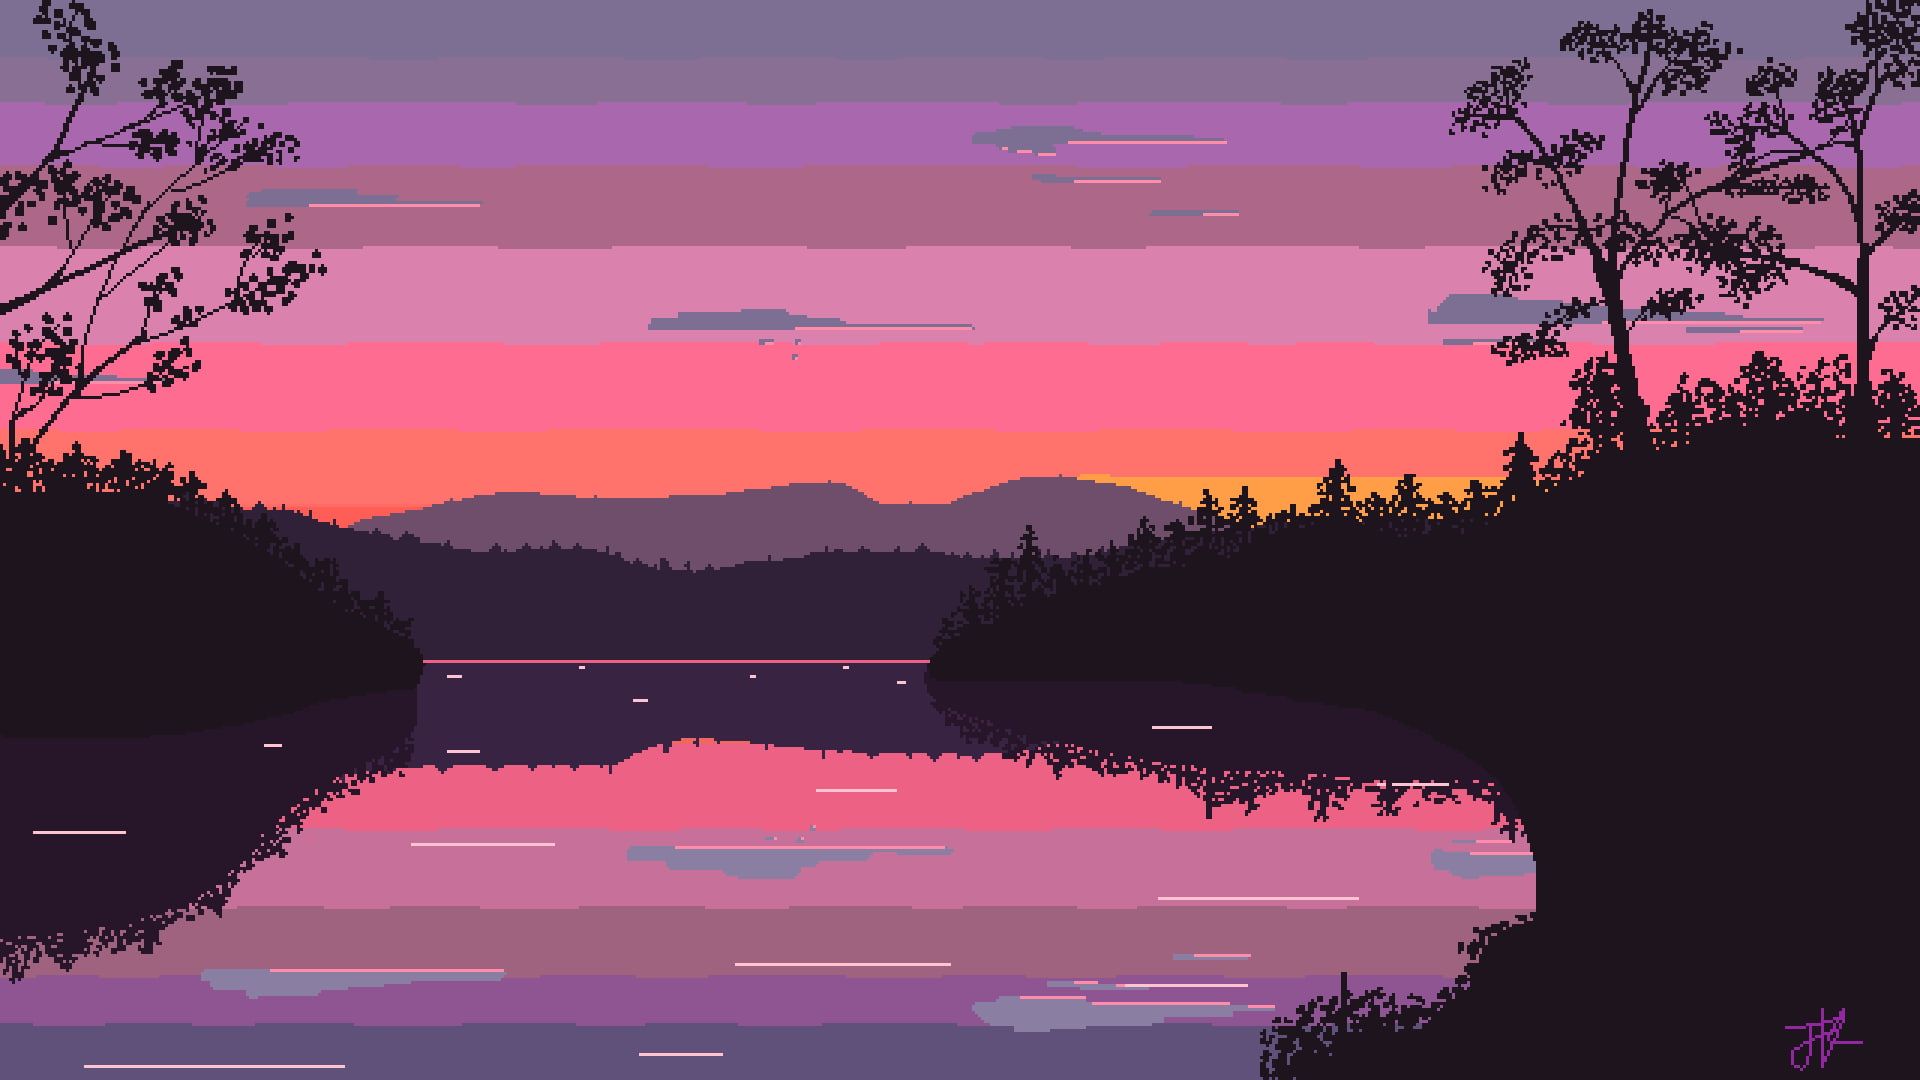 A sunset over the water with trees in it - Pixel art